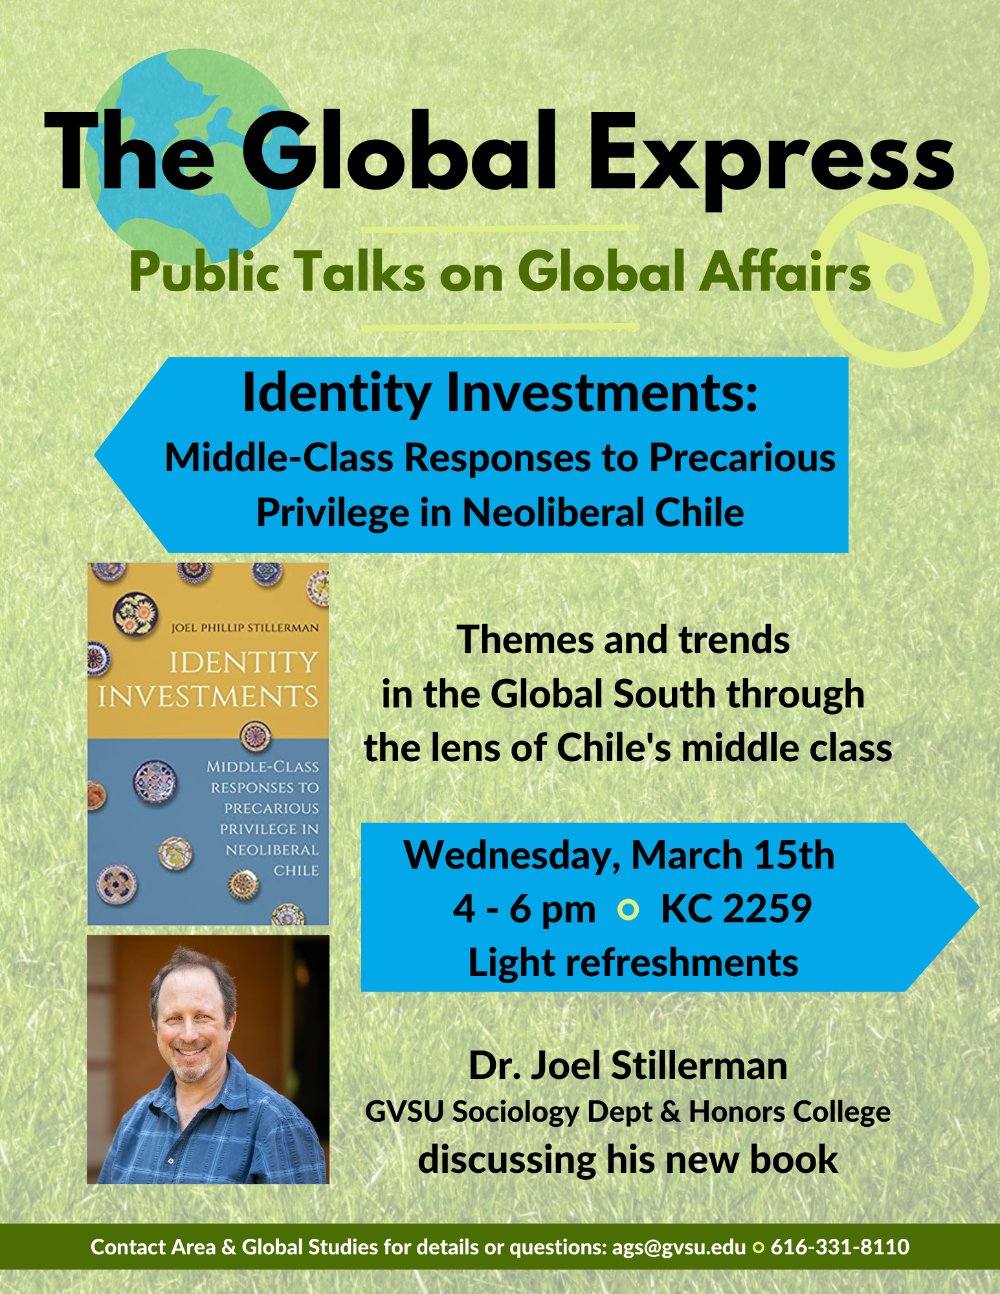 Global Express series: Middle-Class Responses to Precarious Privilege in Neoliberal Chile